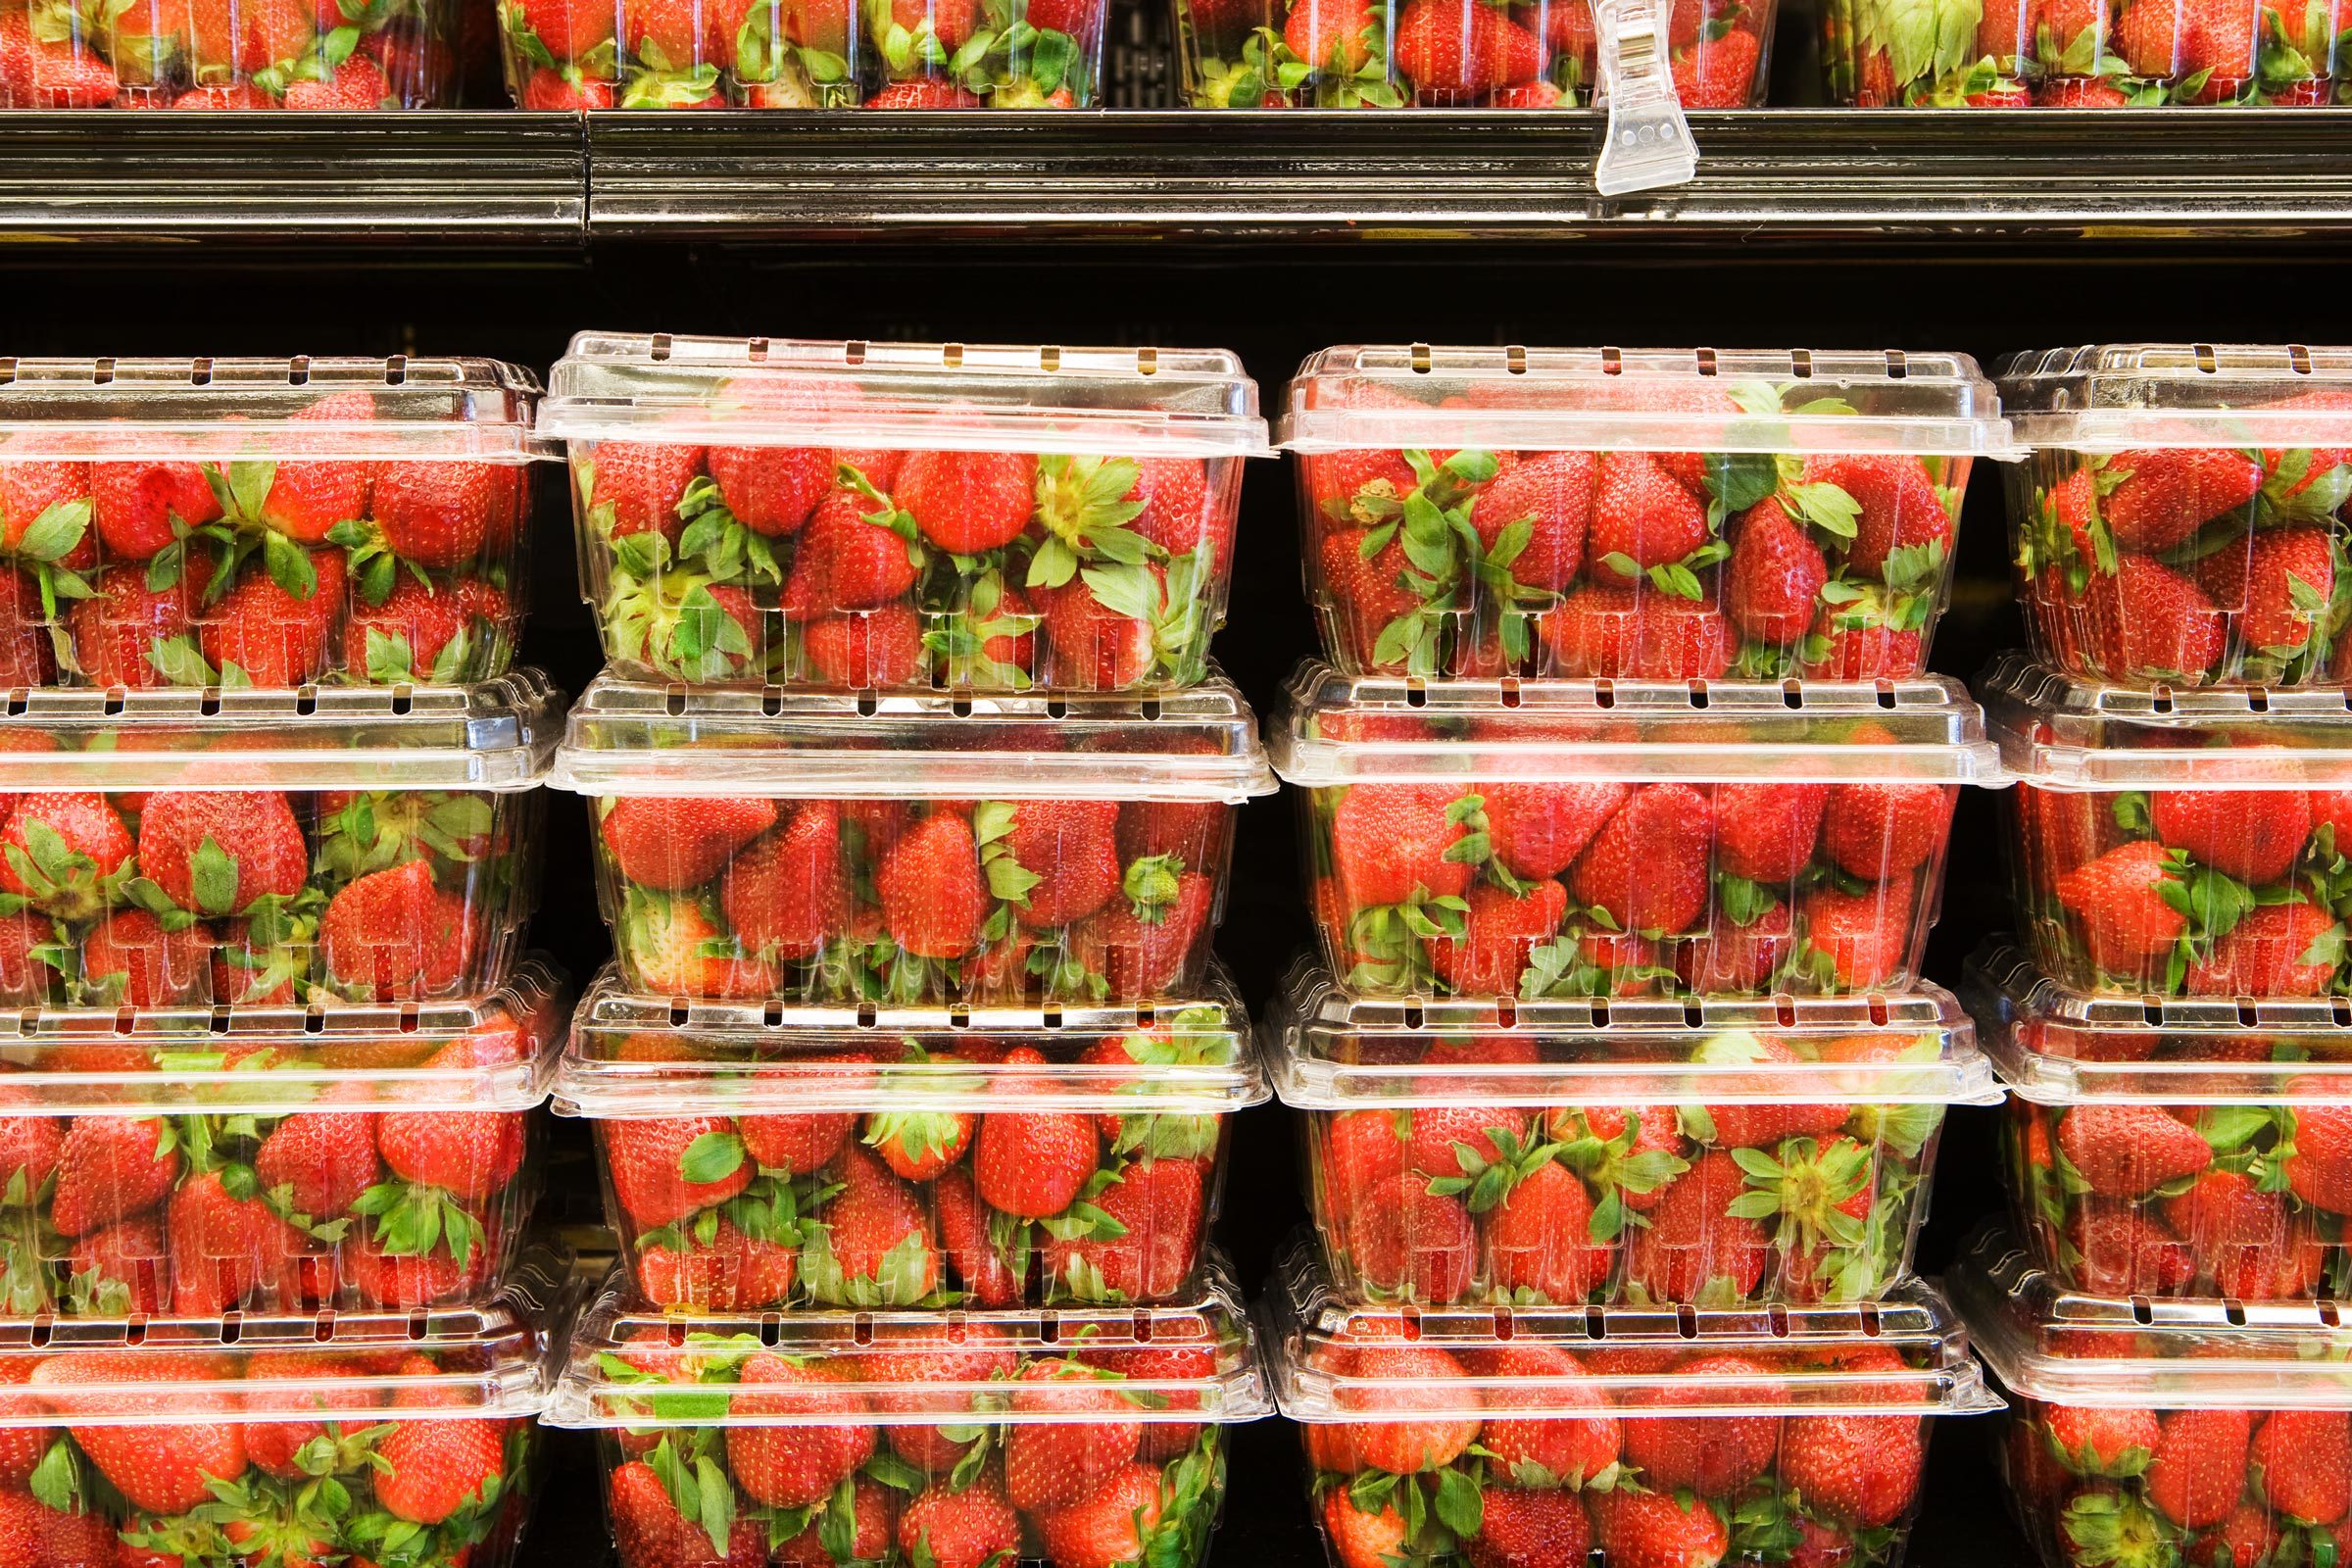 Hepatitis A Outbreak Potentially Linked to Strawberries Sold in the US and Canada